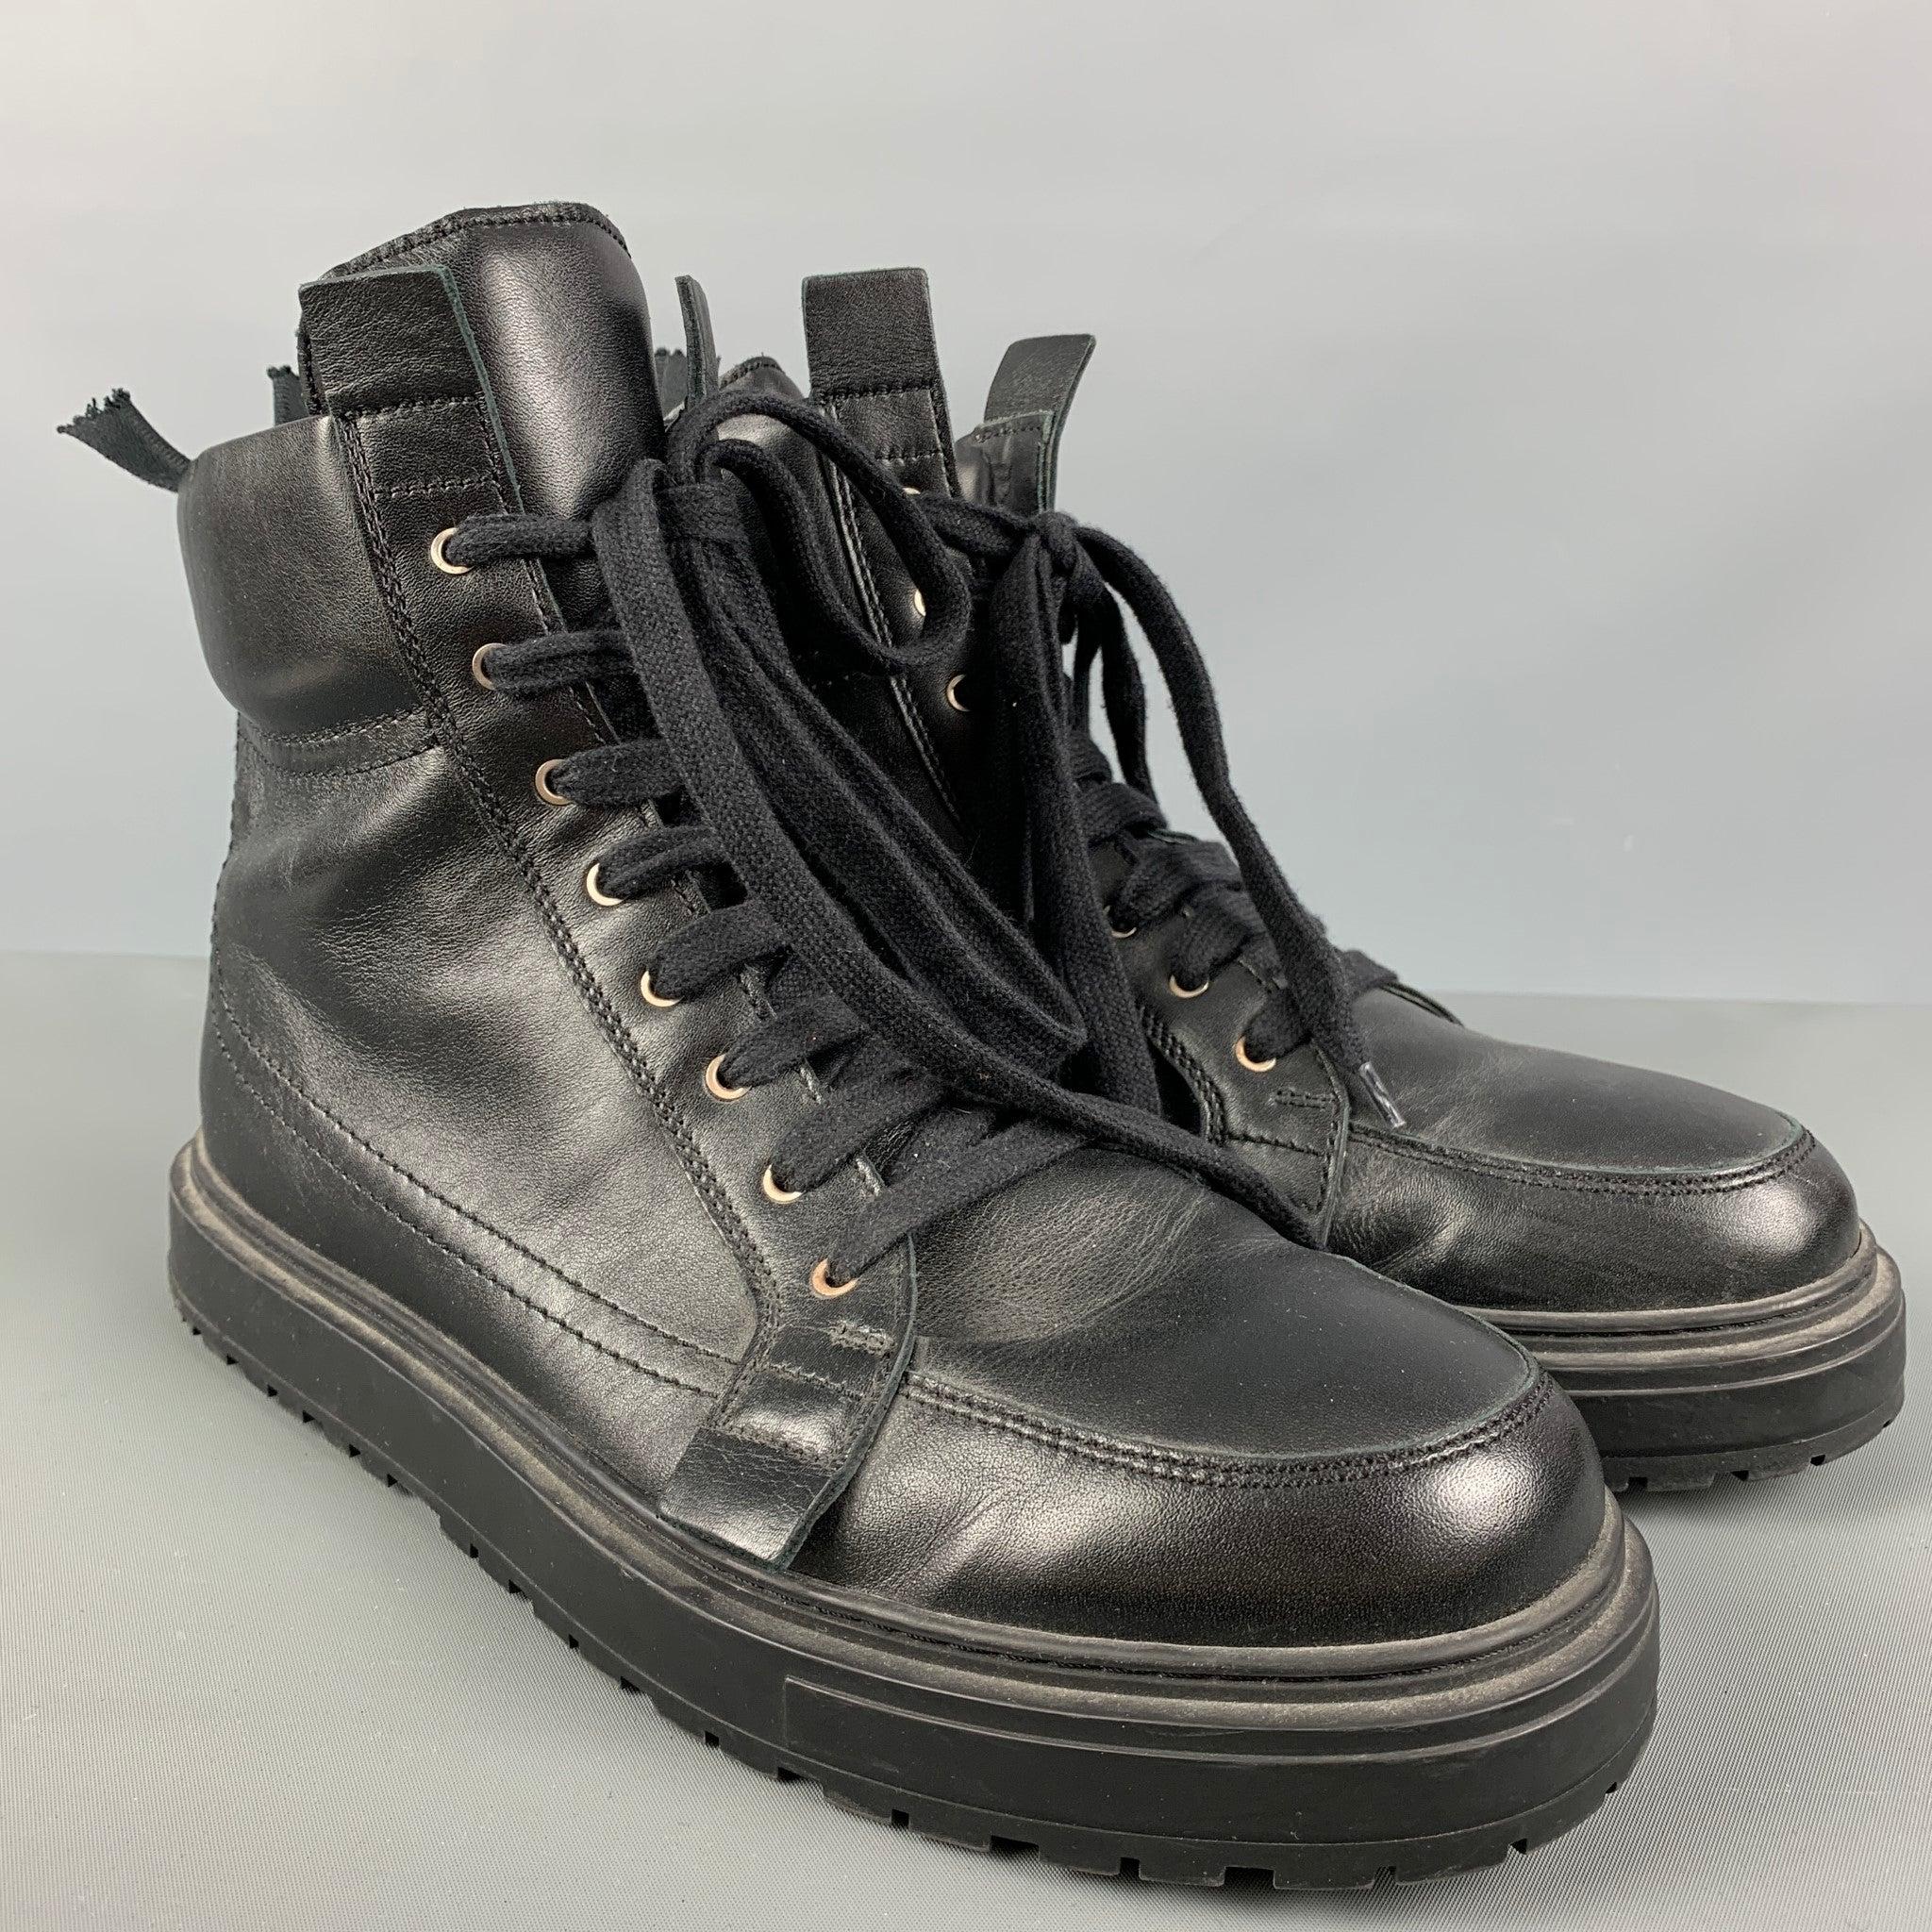 KRIS VAN ASSCHE ankle boots comes in a black solid leather featuring a leather trim details, lace up, a back zipper, and thick sole.
Good Pre-Owned Condition. Broken Zipper. As-is.
 

Marked:   42 

Measurements: 
  Length: 12 inches  Width: 4.5